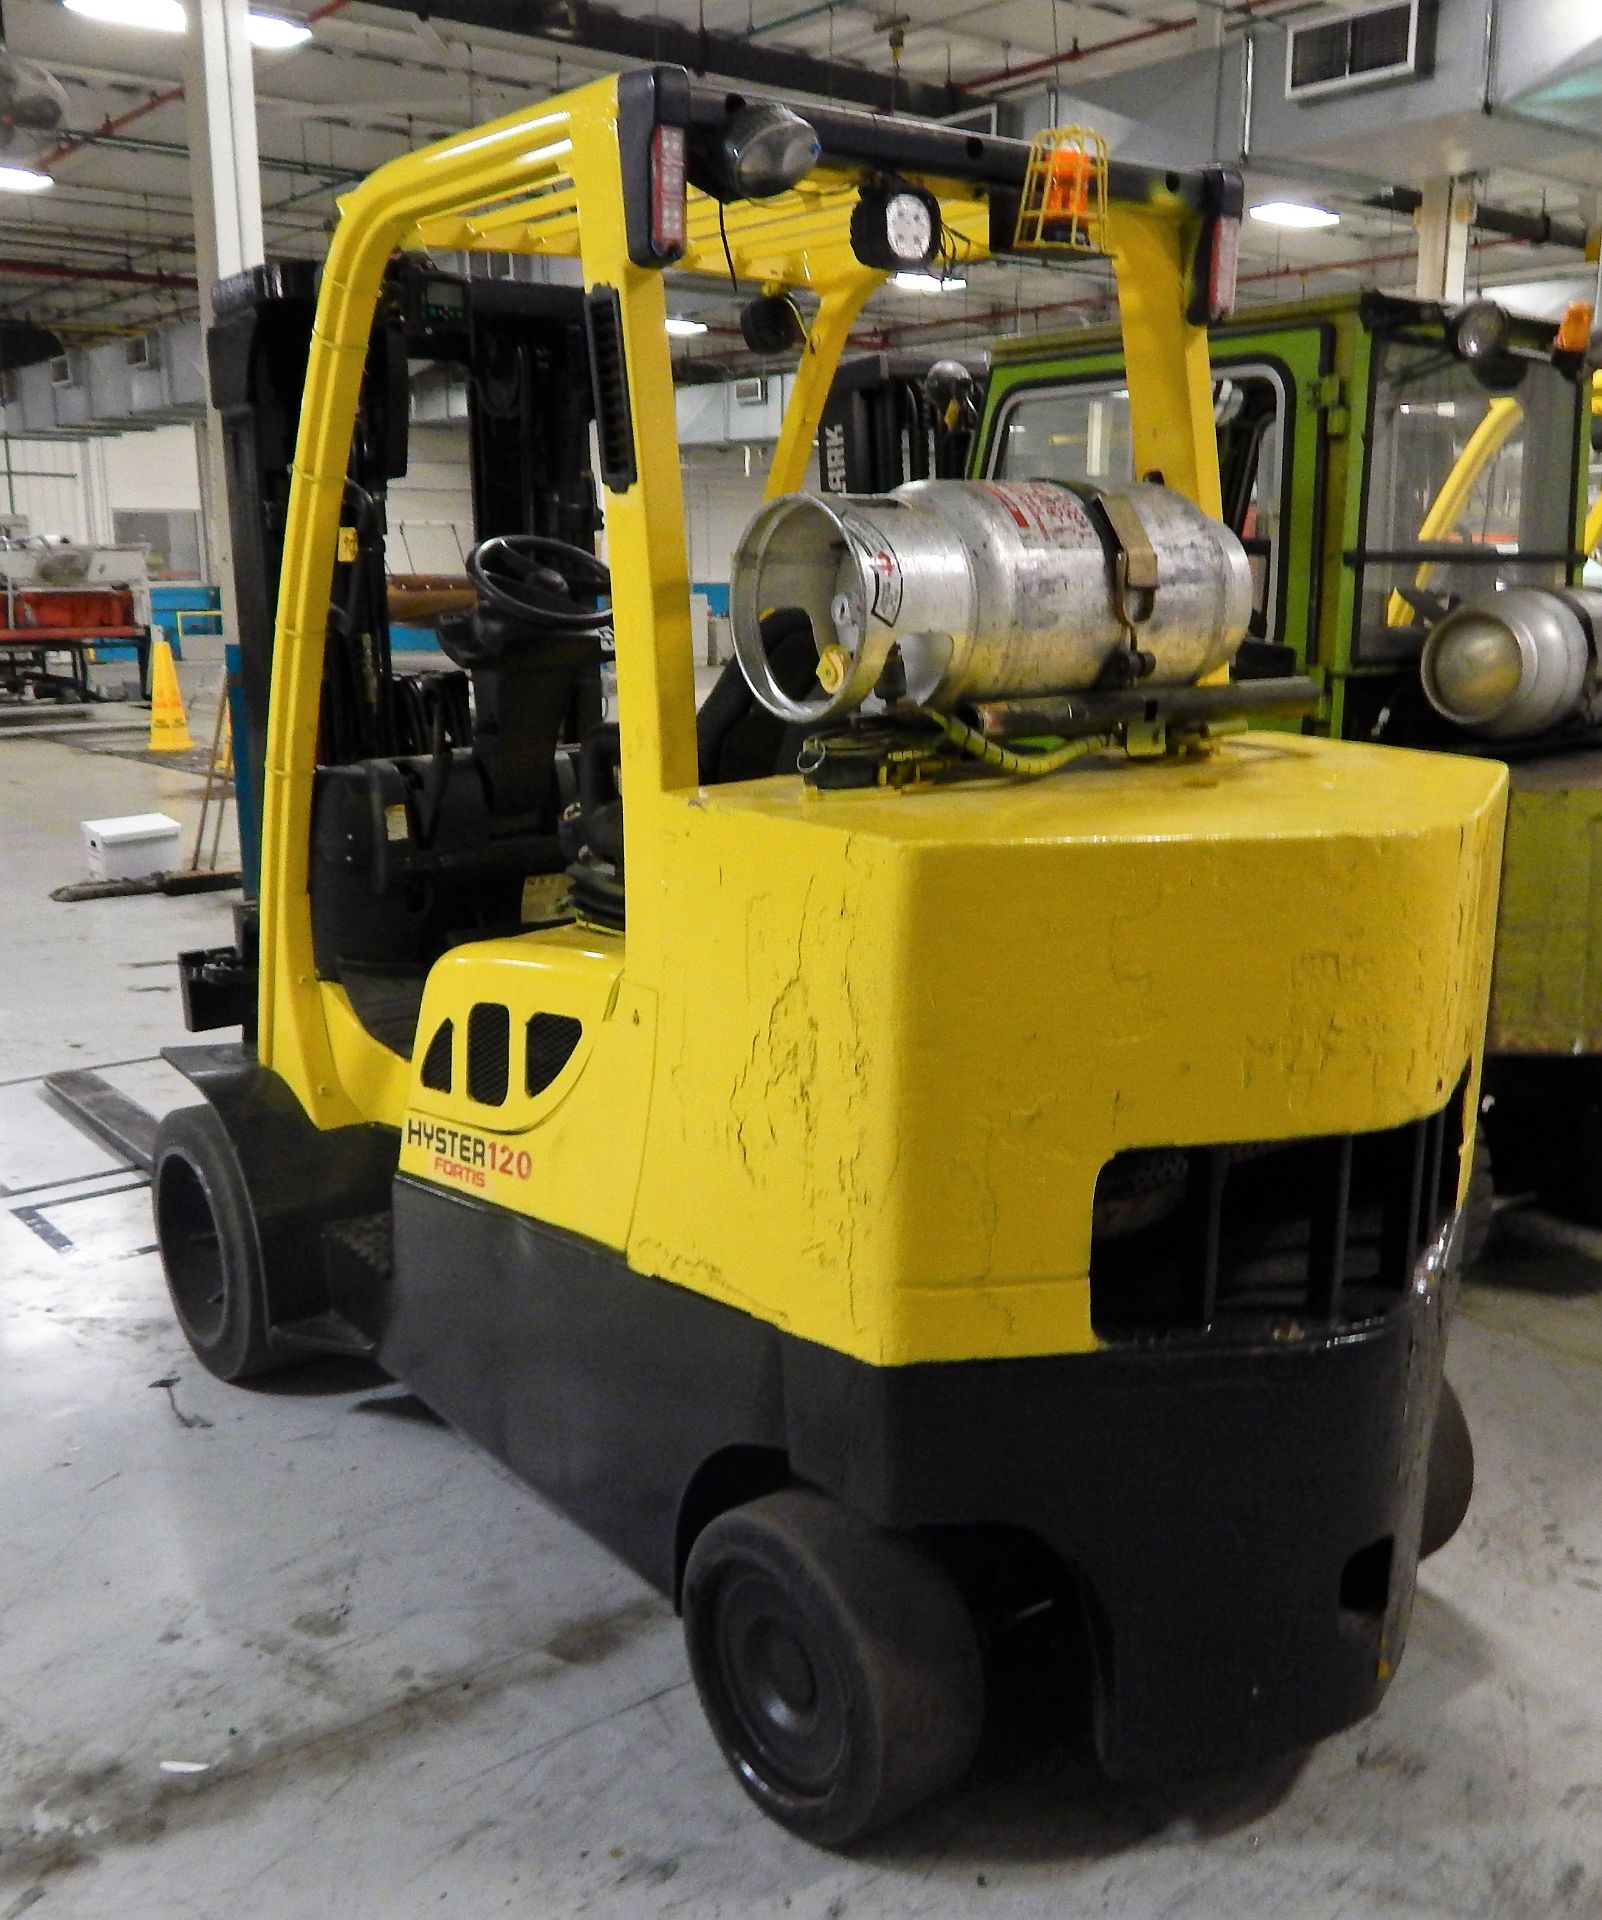 HYSTER MDL. S120FTPRS 12,000# CAPACITY FORKLIFT TRUCK, WITH 9515 HOURS, 4-WAY HYDRAULICS, 85'' - Image 2 of 4